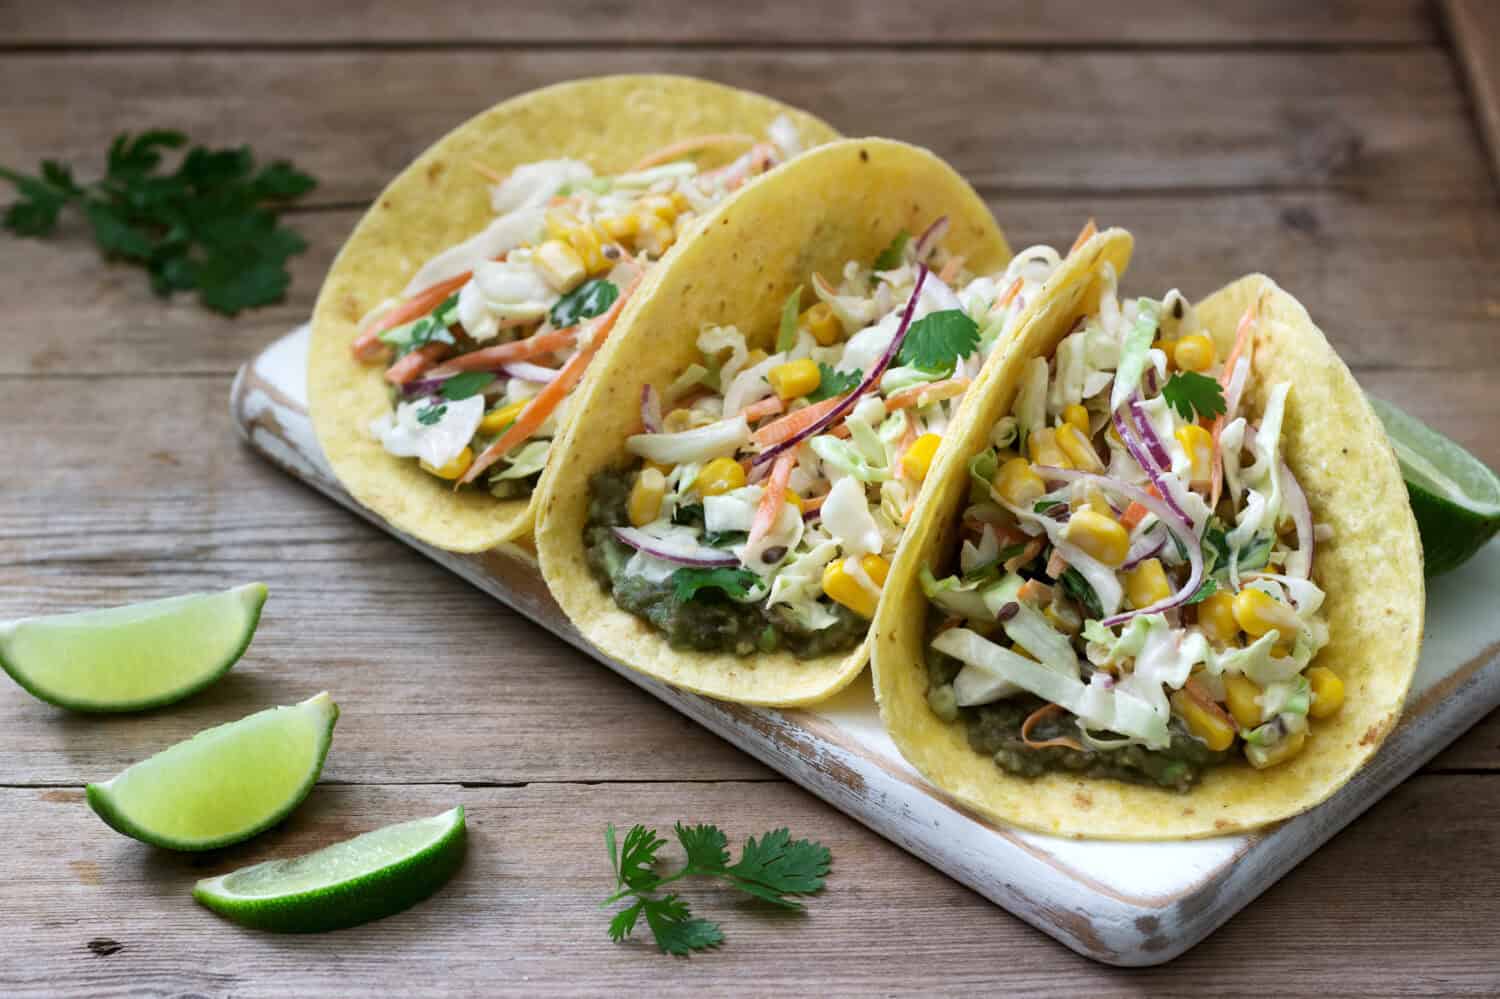 Vegetarian tacos stuffed with cabbage salad on a wooden background. Rustic style.